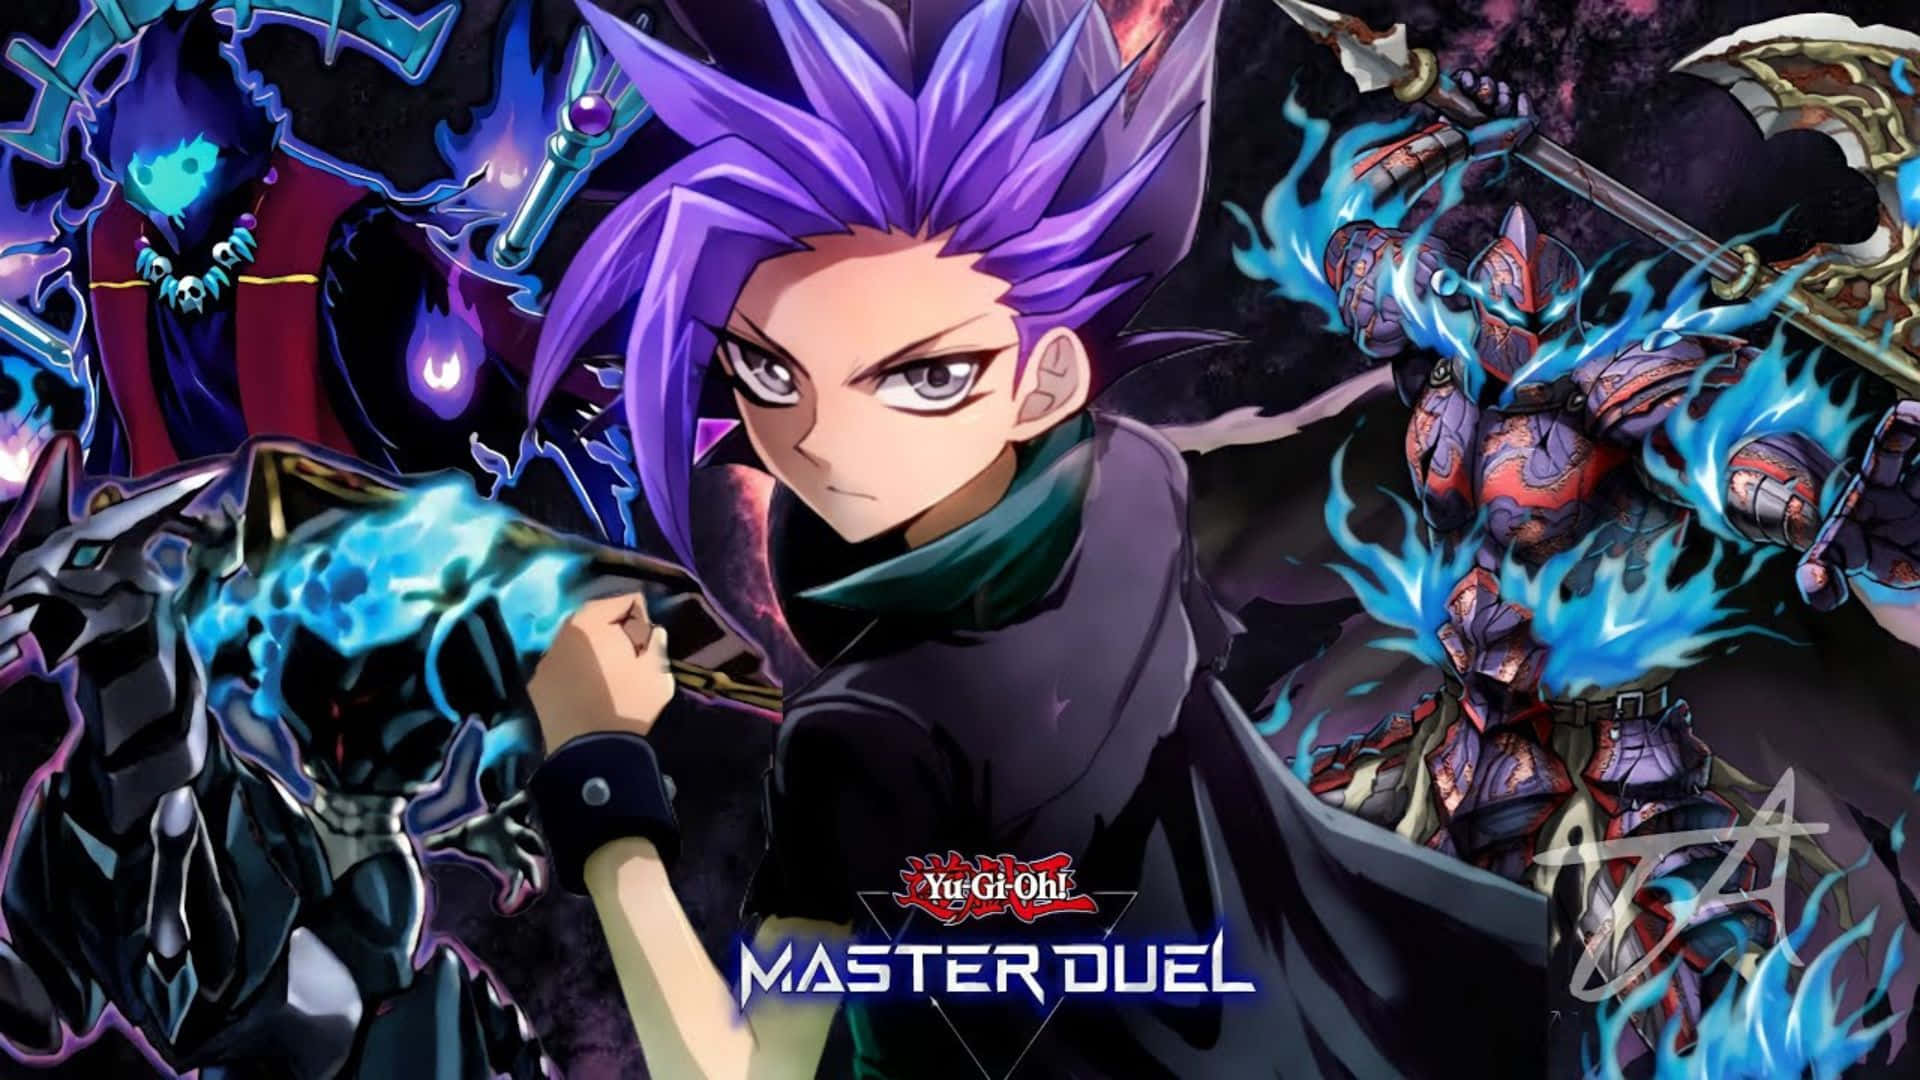 Yu-gi-oh Yuto unleashes his power in this epic battle scene. Wallpaper